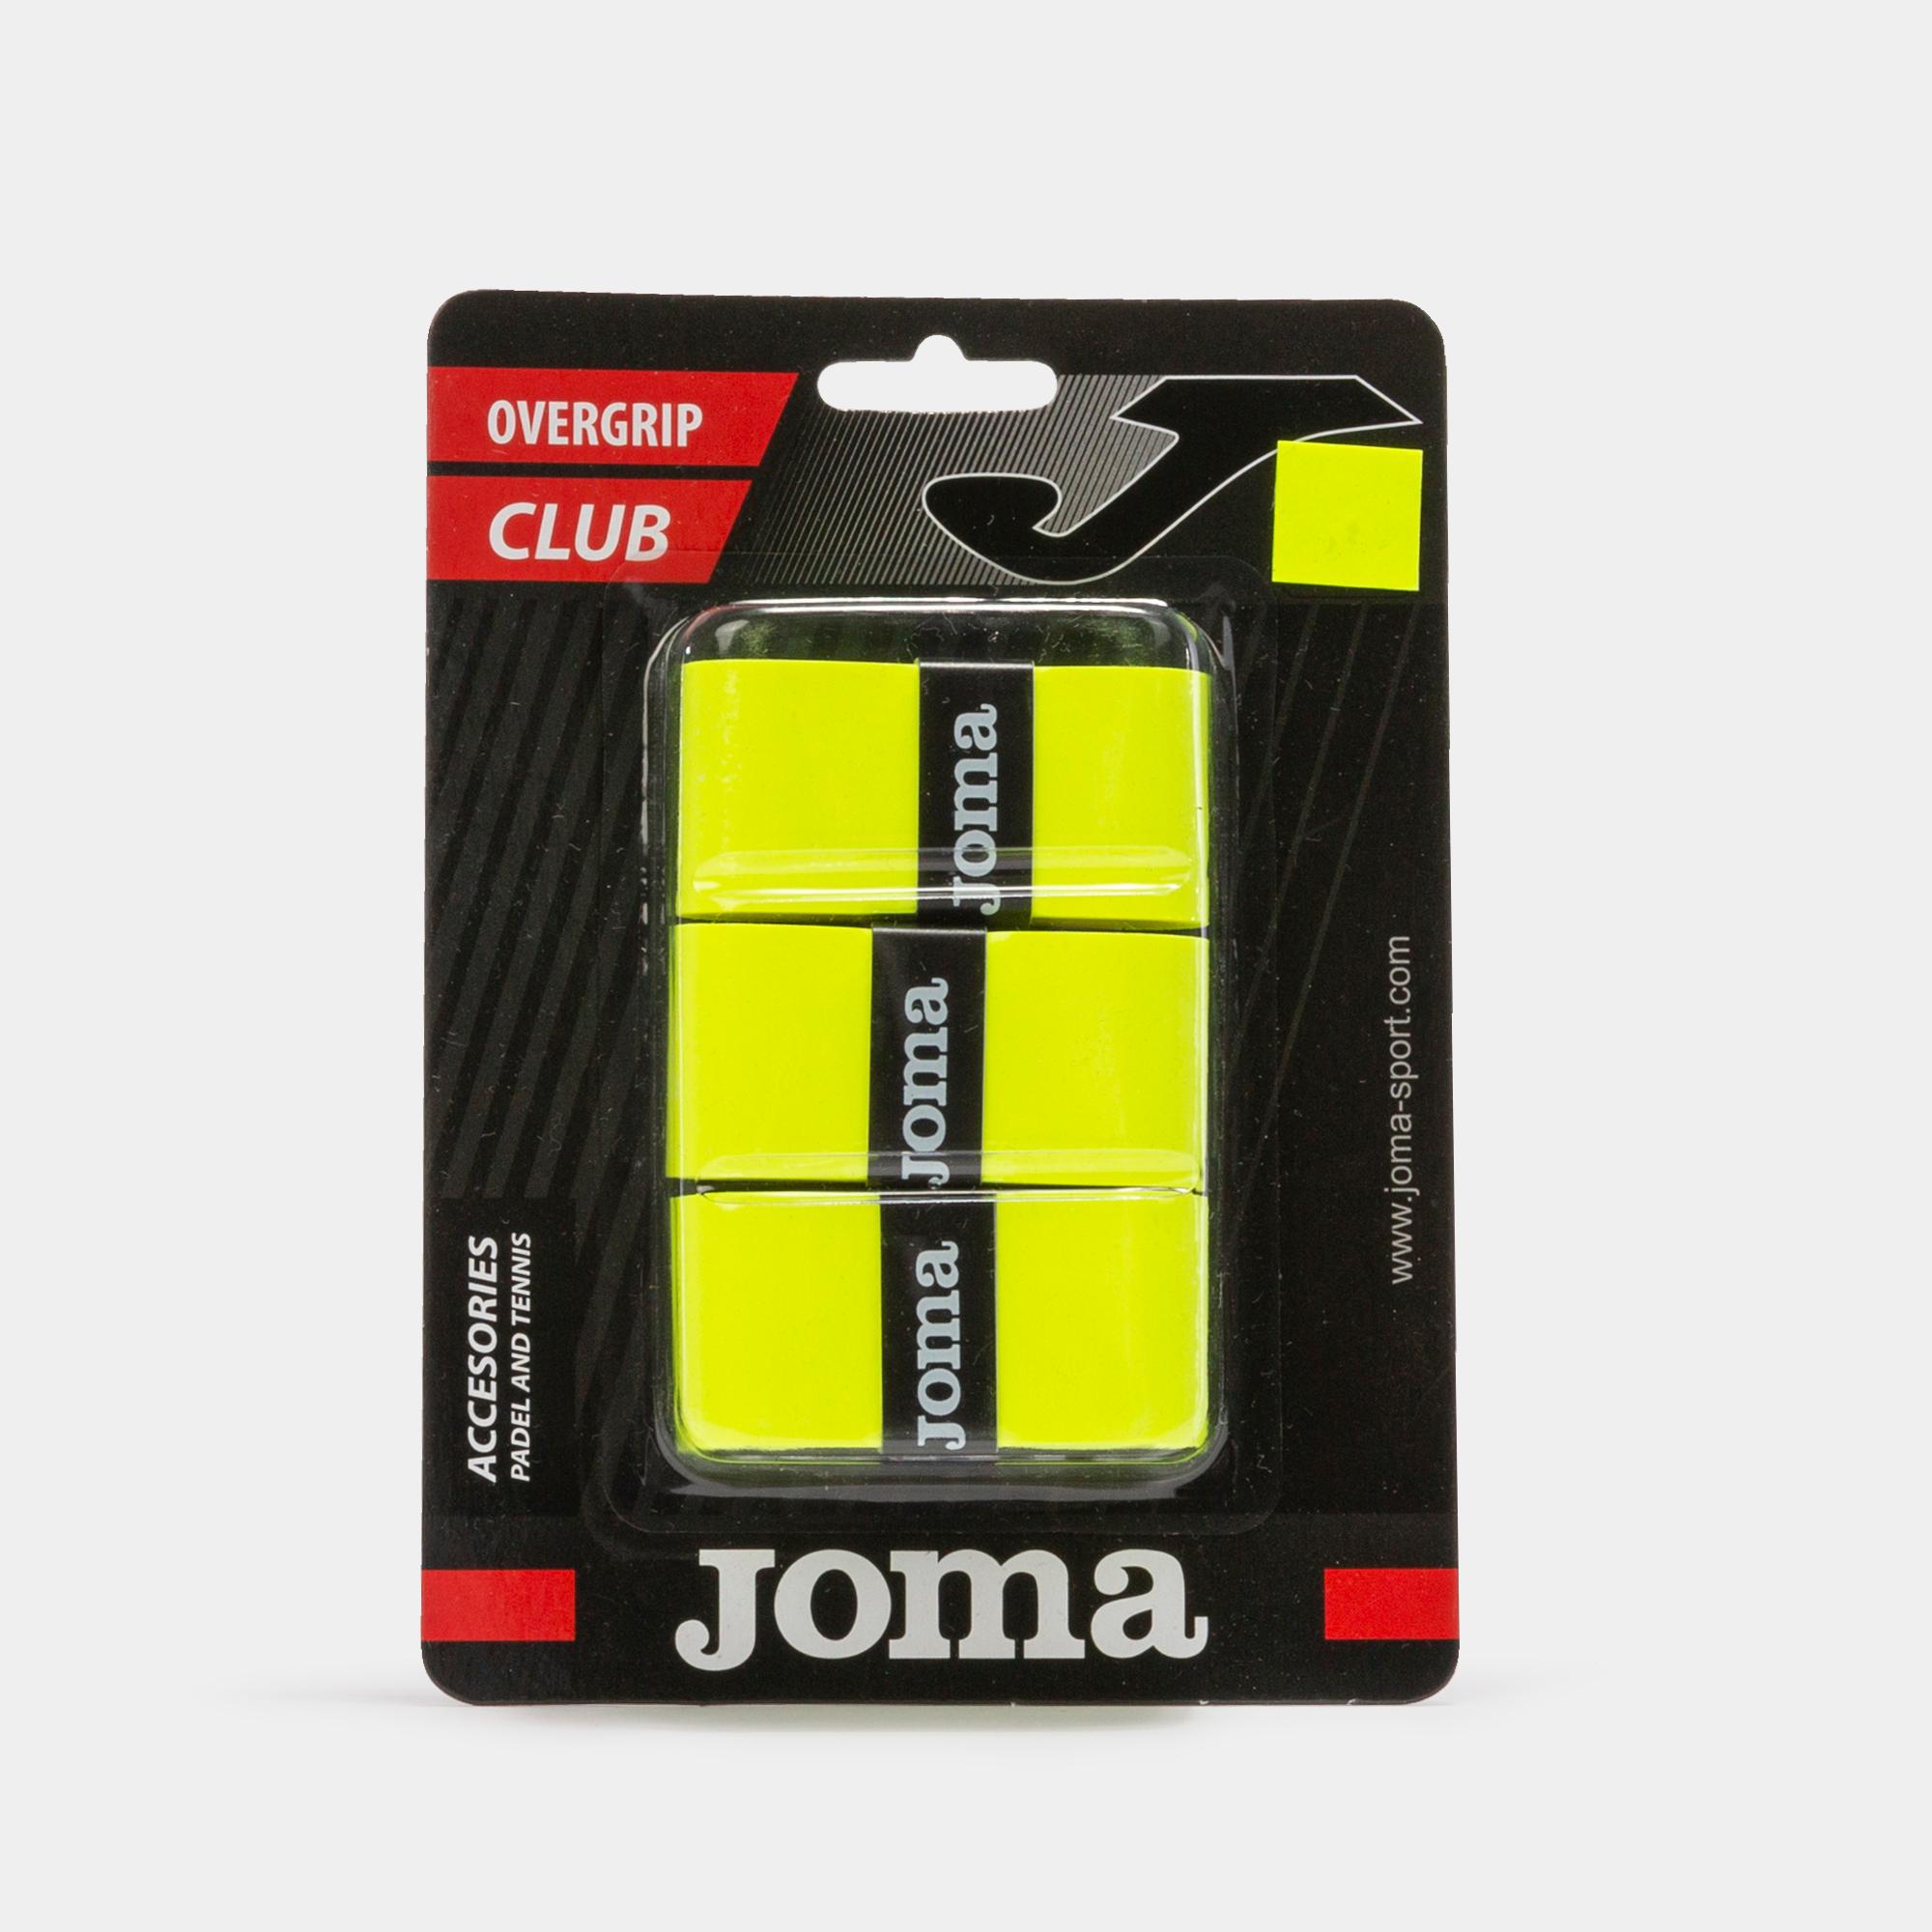 Joma Accessories Overgrip Club Cuhsion